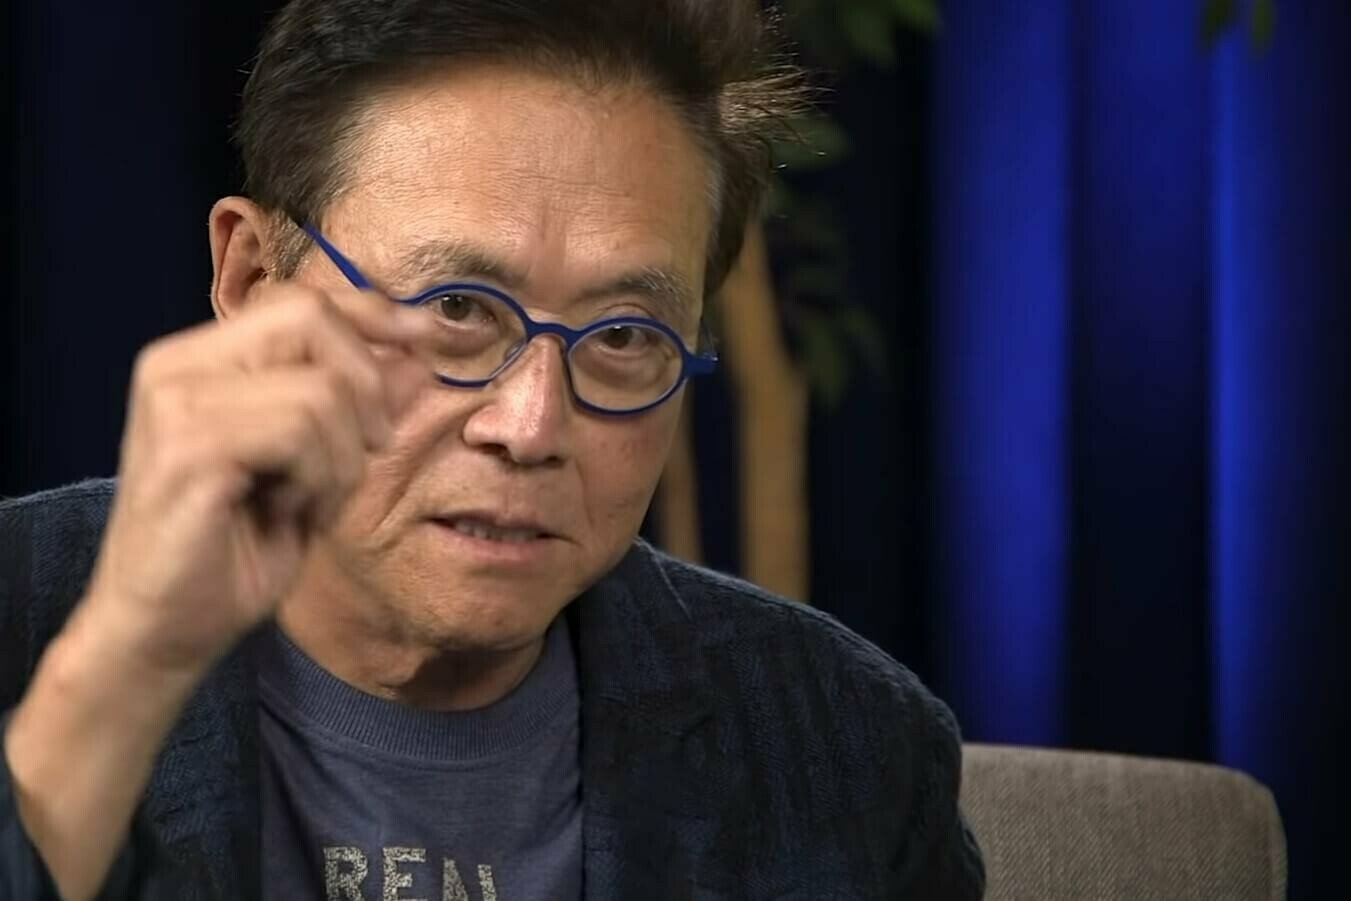 Rich Dad Poor Dad Author Robert Kiyosaki Says Bitcoin, Gold, Silver Are “Bargains” Today, Warns About Stock Market Crash